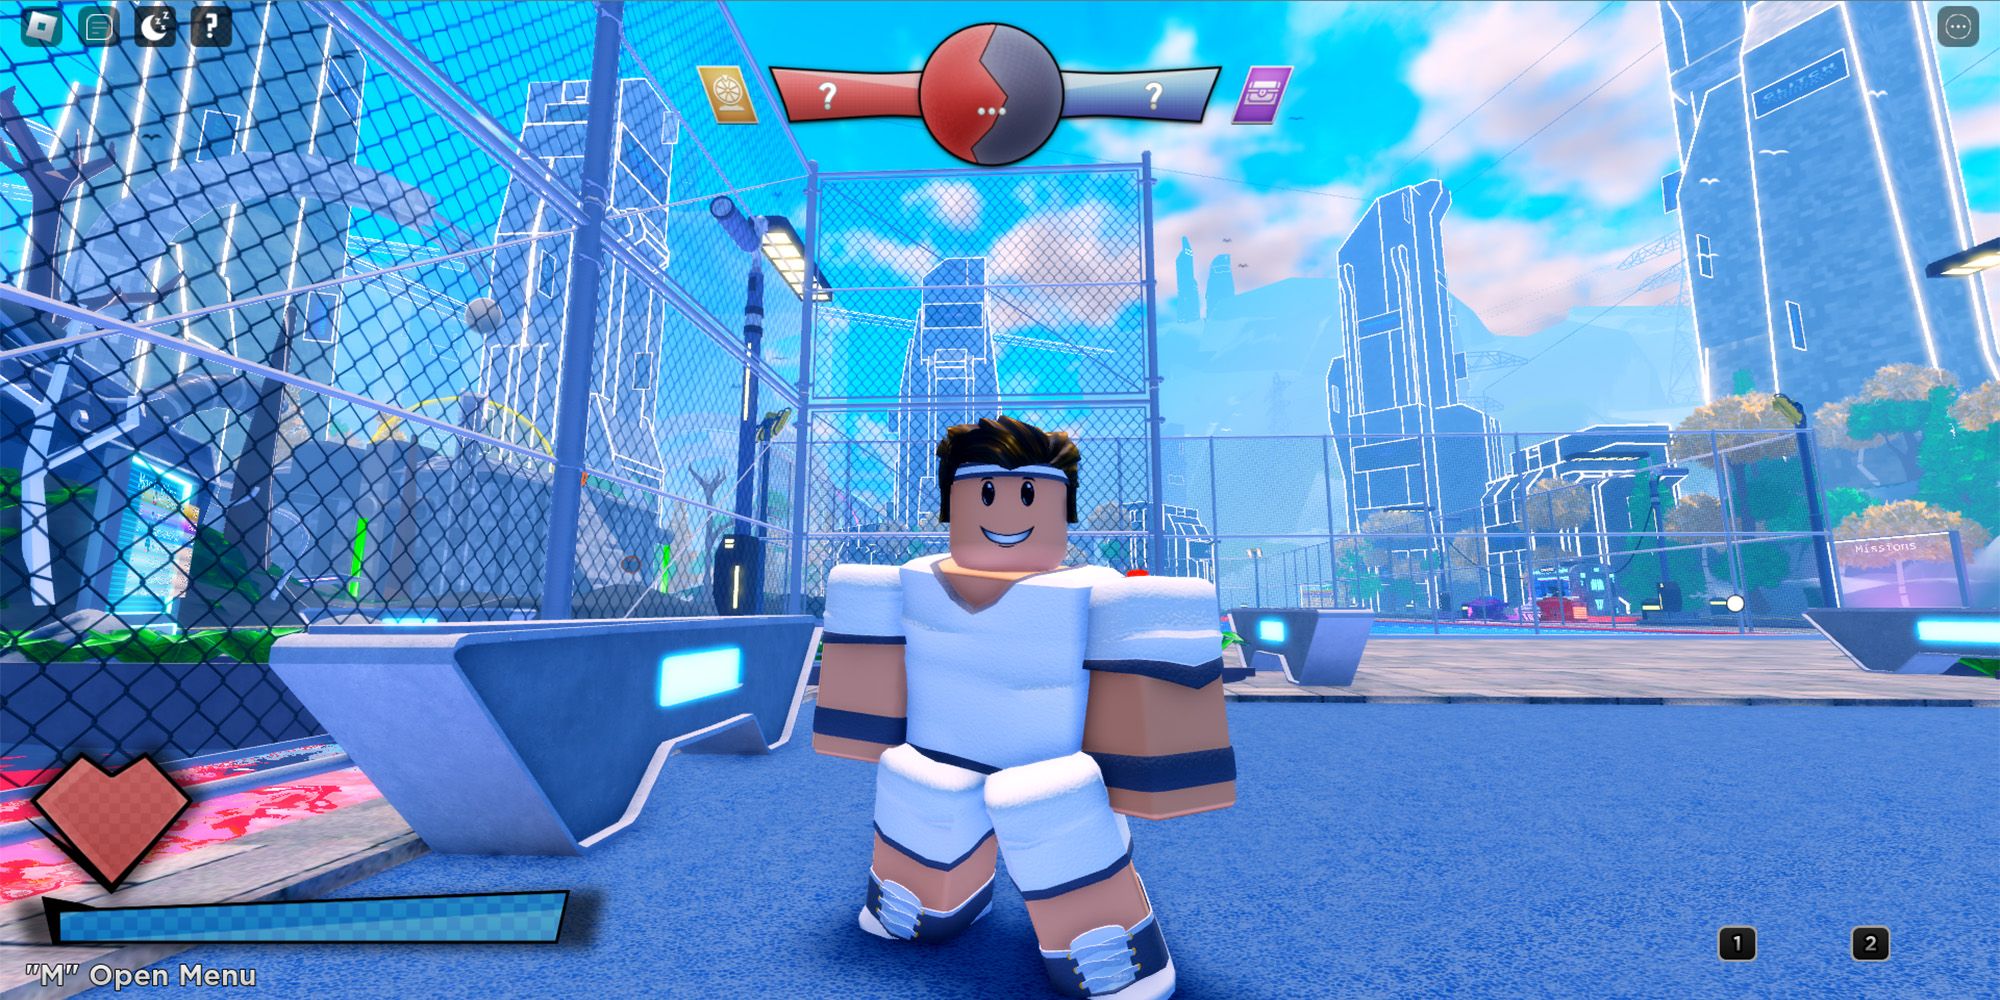 A Roblox character in gym clothes hangs out near a dodgeball court in the Roblox game Dodge Stars.